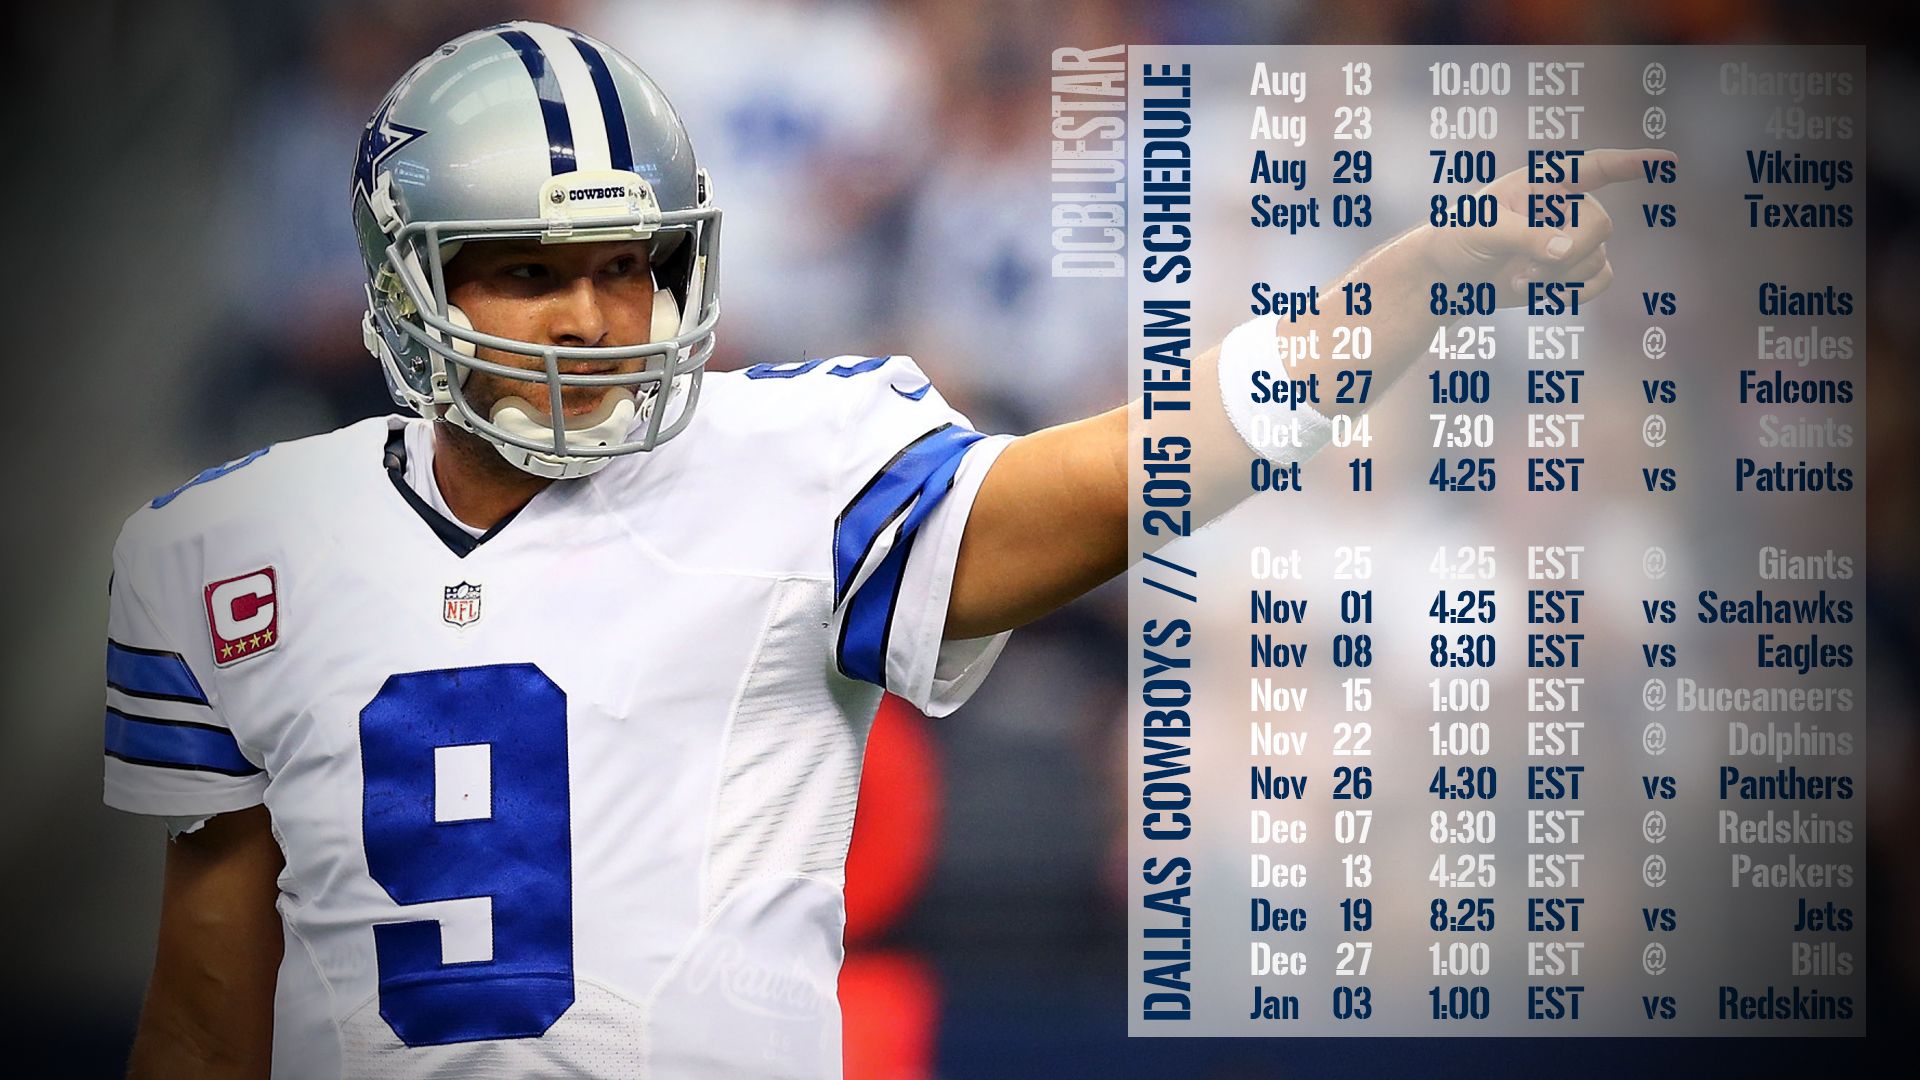 Dallas Cowboys Schedule Wallpapers Group (65+)